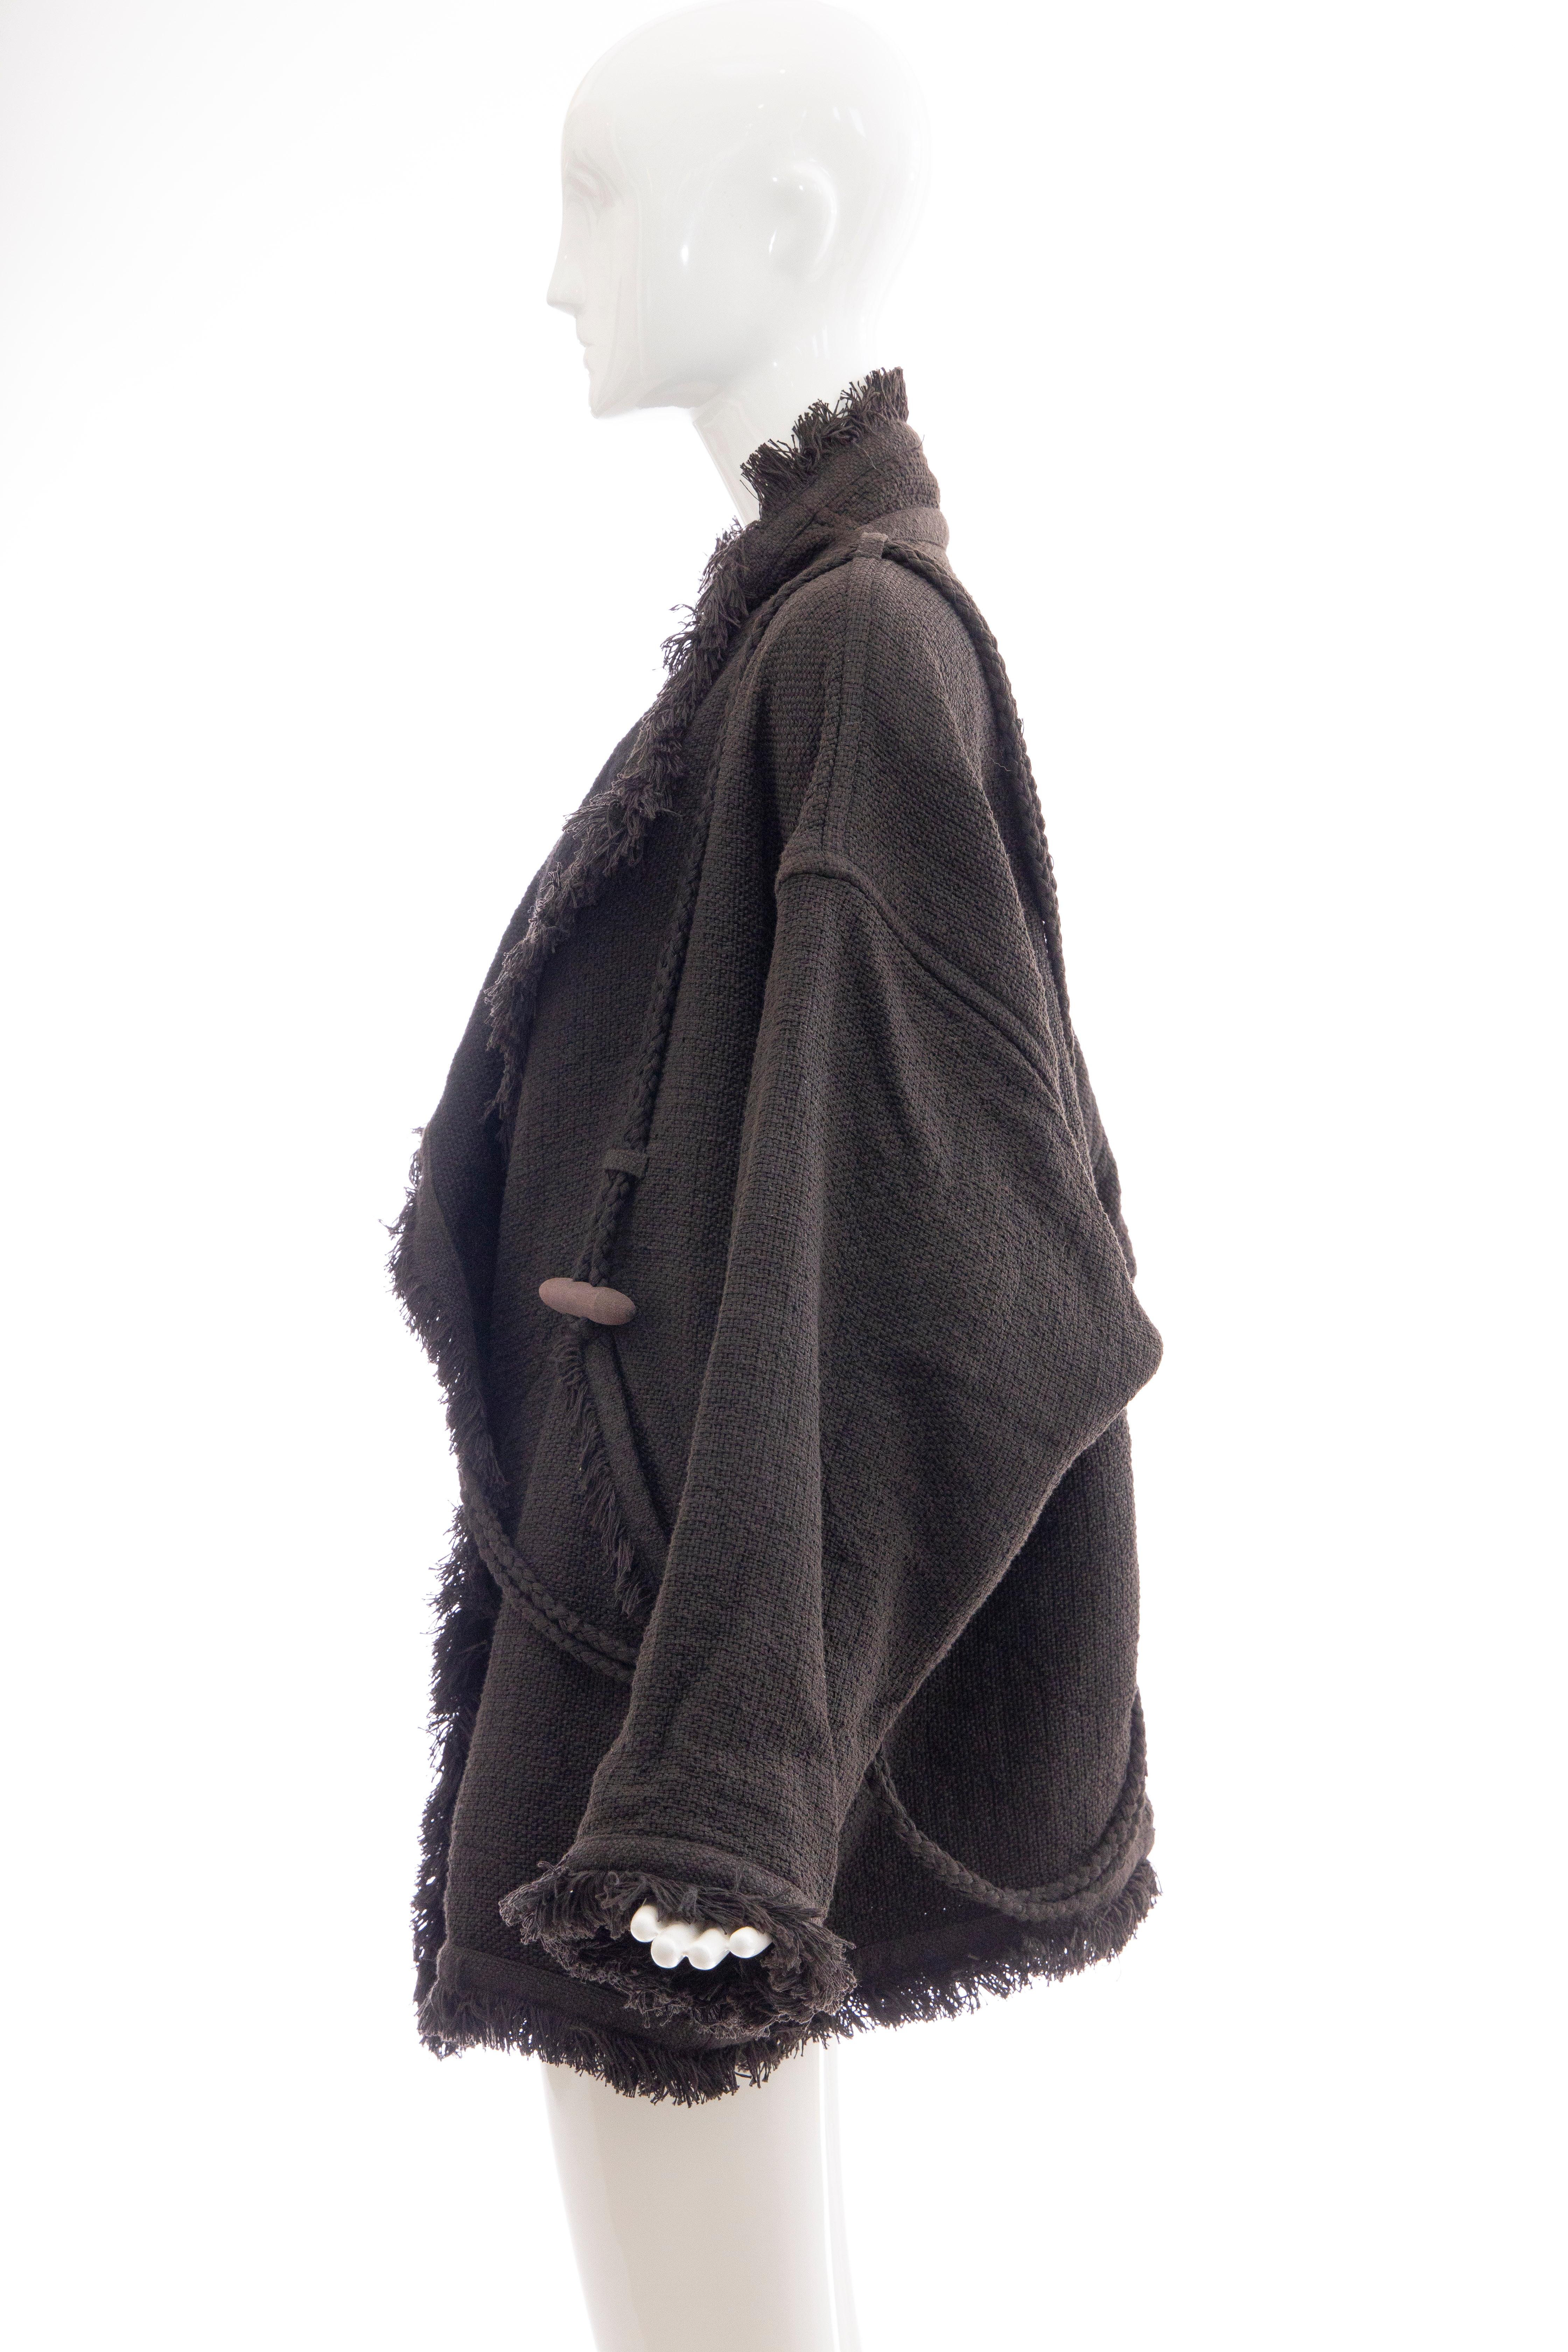 Issey Miyake Charcoal Grey Fringed Cotton Wool Woven Jacket, Fall 1984 For Sale 1